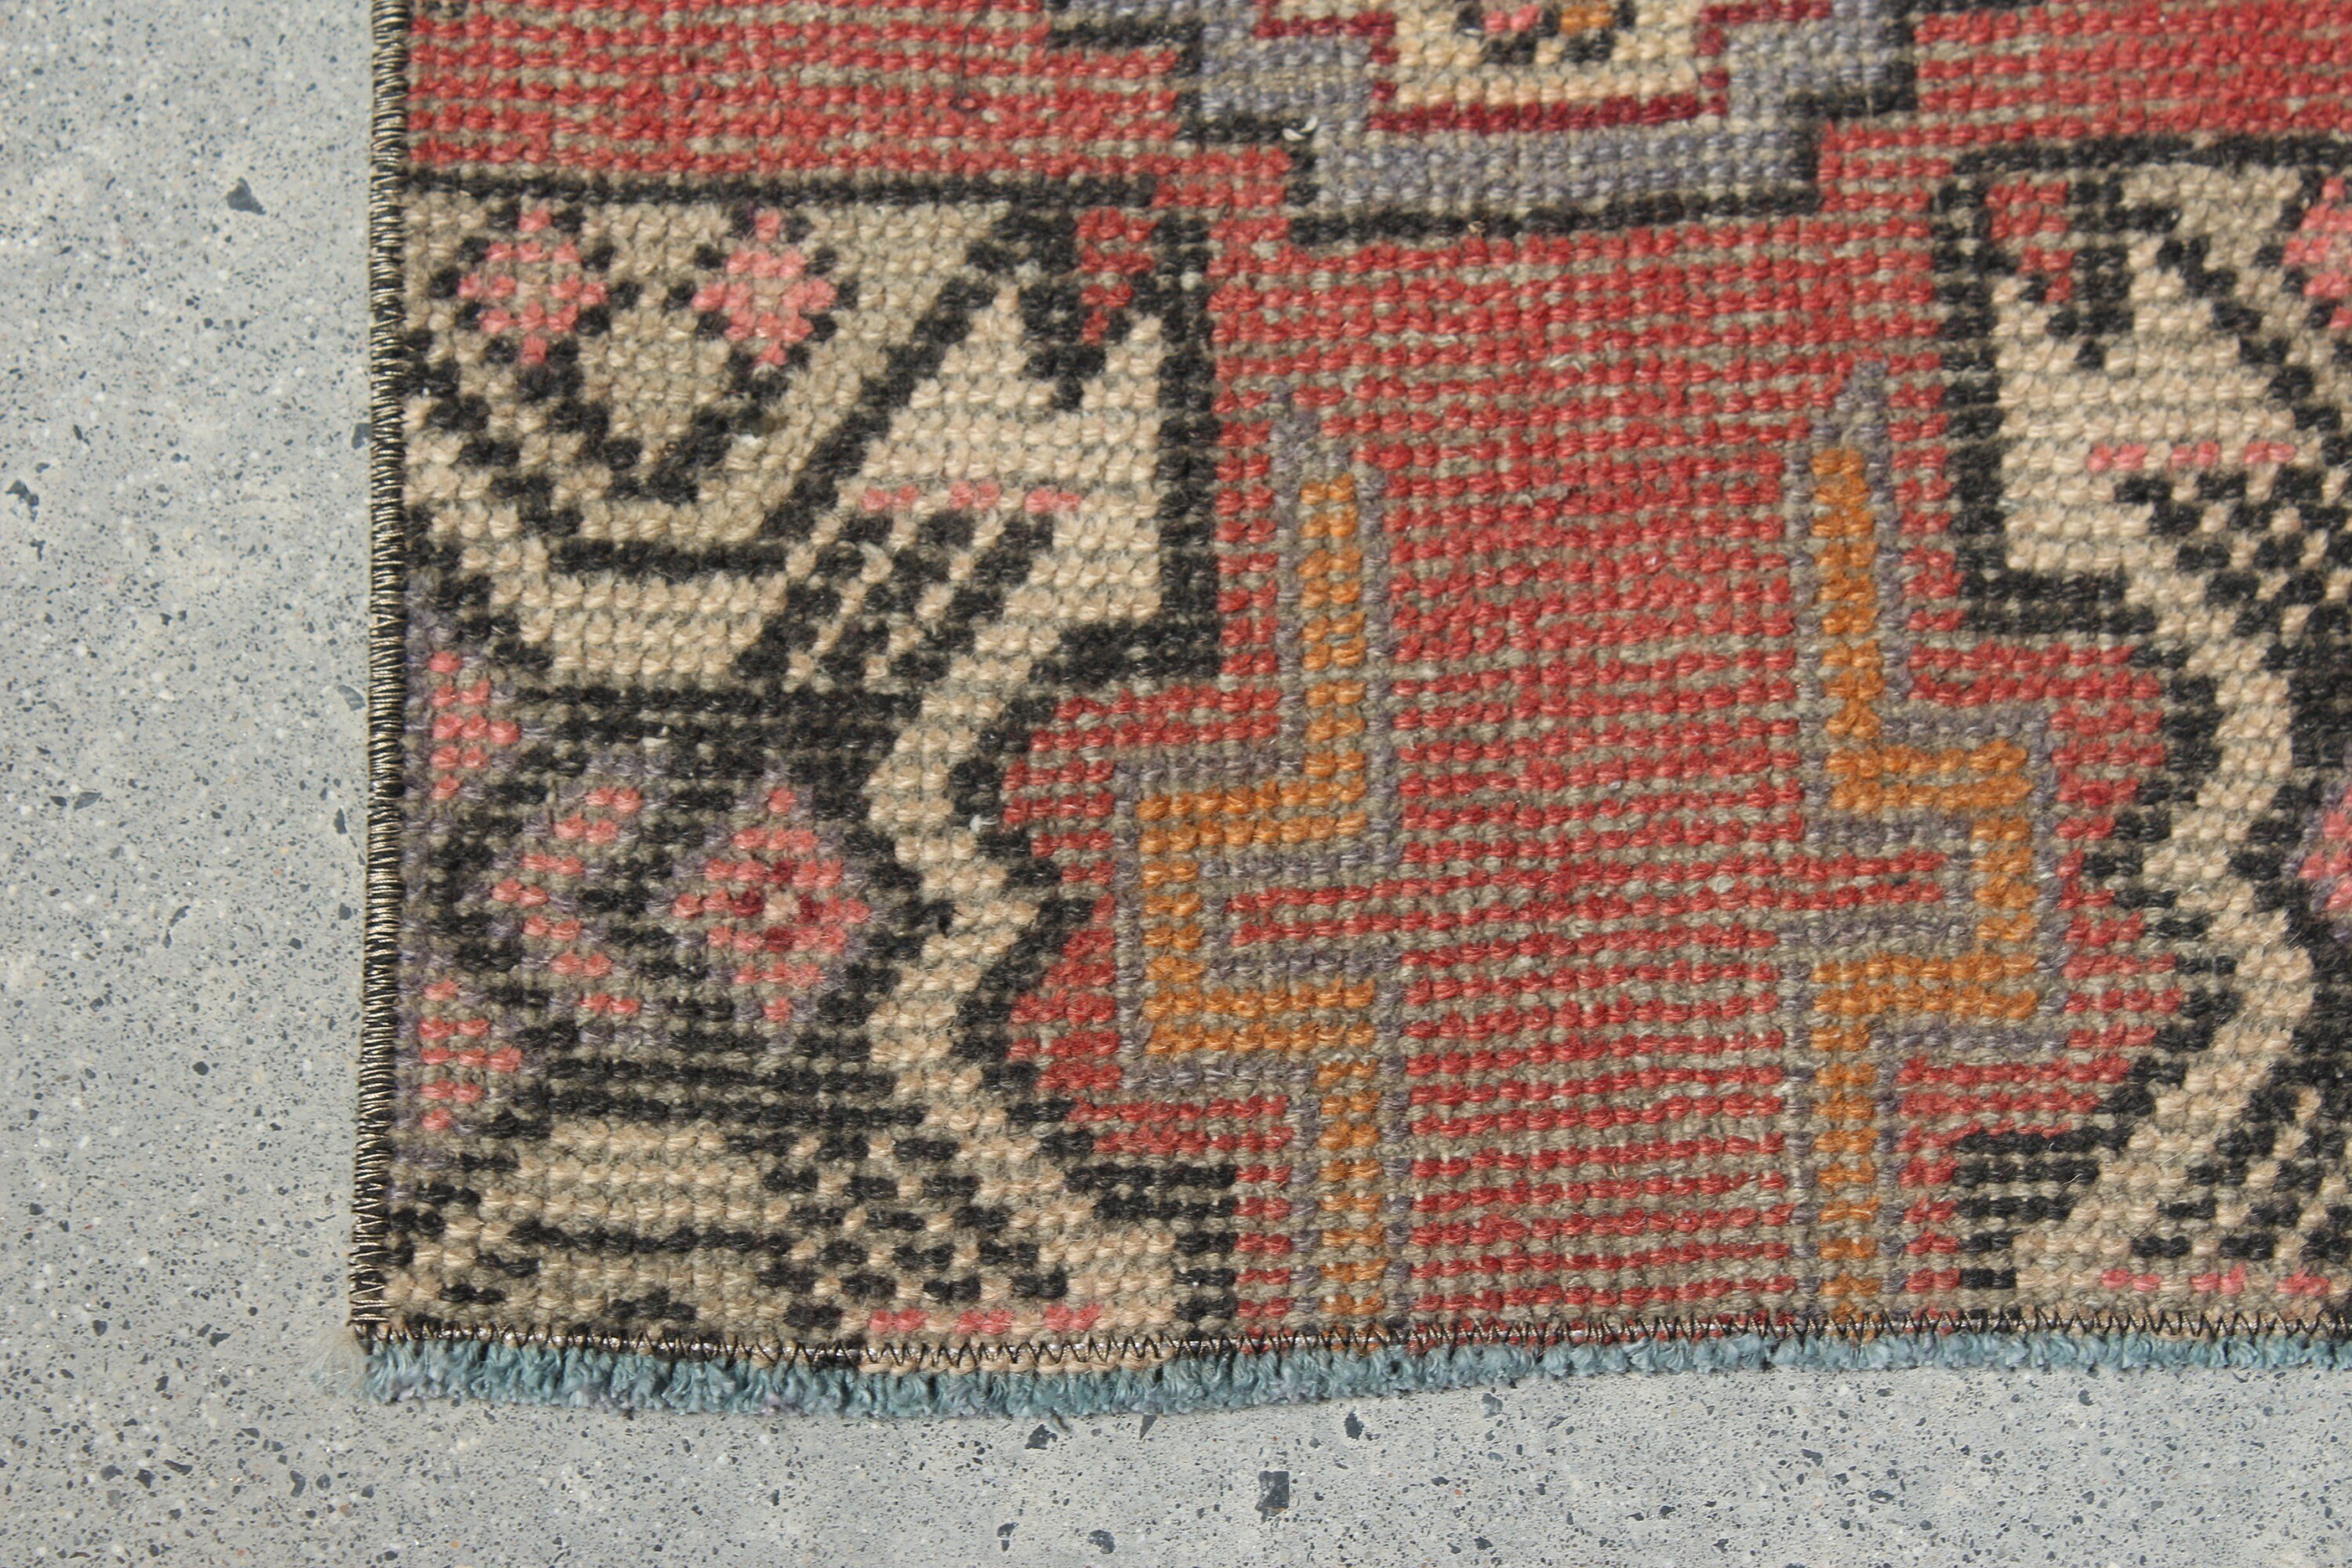 Small Woven Rug Rugs, Anatolian Rug, 1.3x2.6 ft Small Rugs, Red Oushak Rug, Antique Rugs, Vintage Rugs, Bedroom Rug, Turkish Rug, Bath Rug